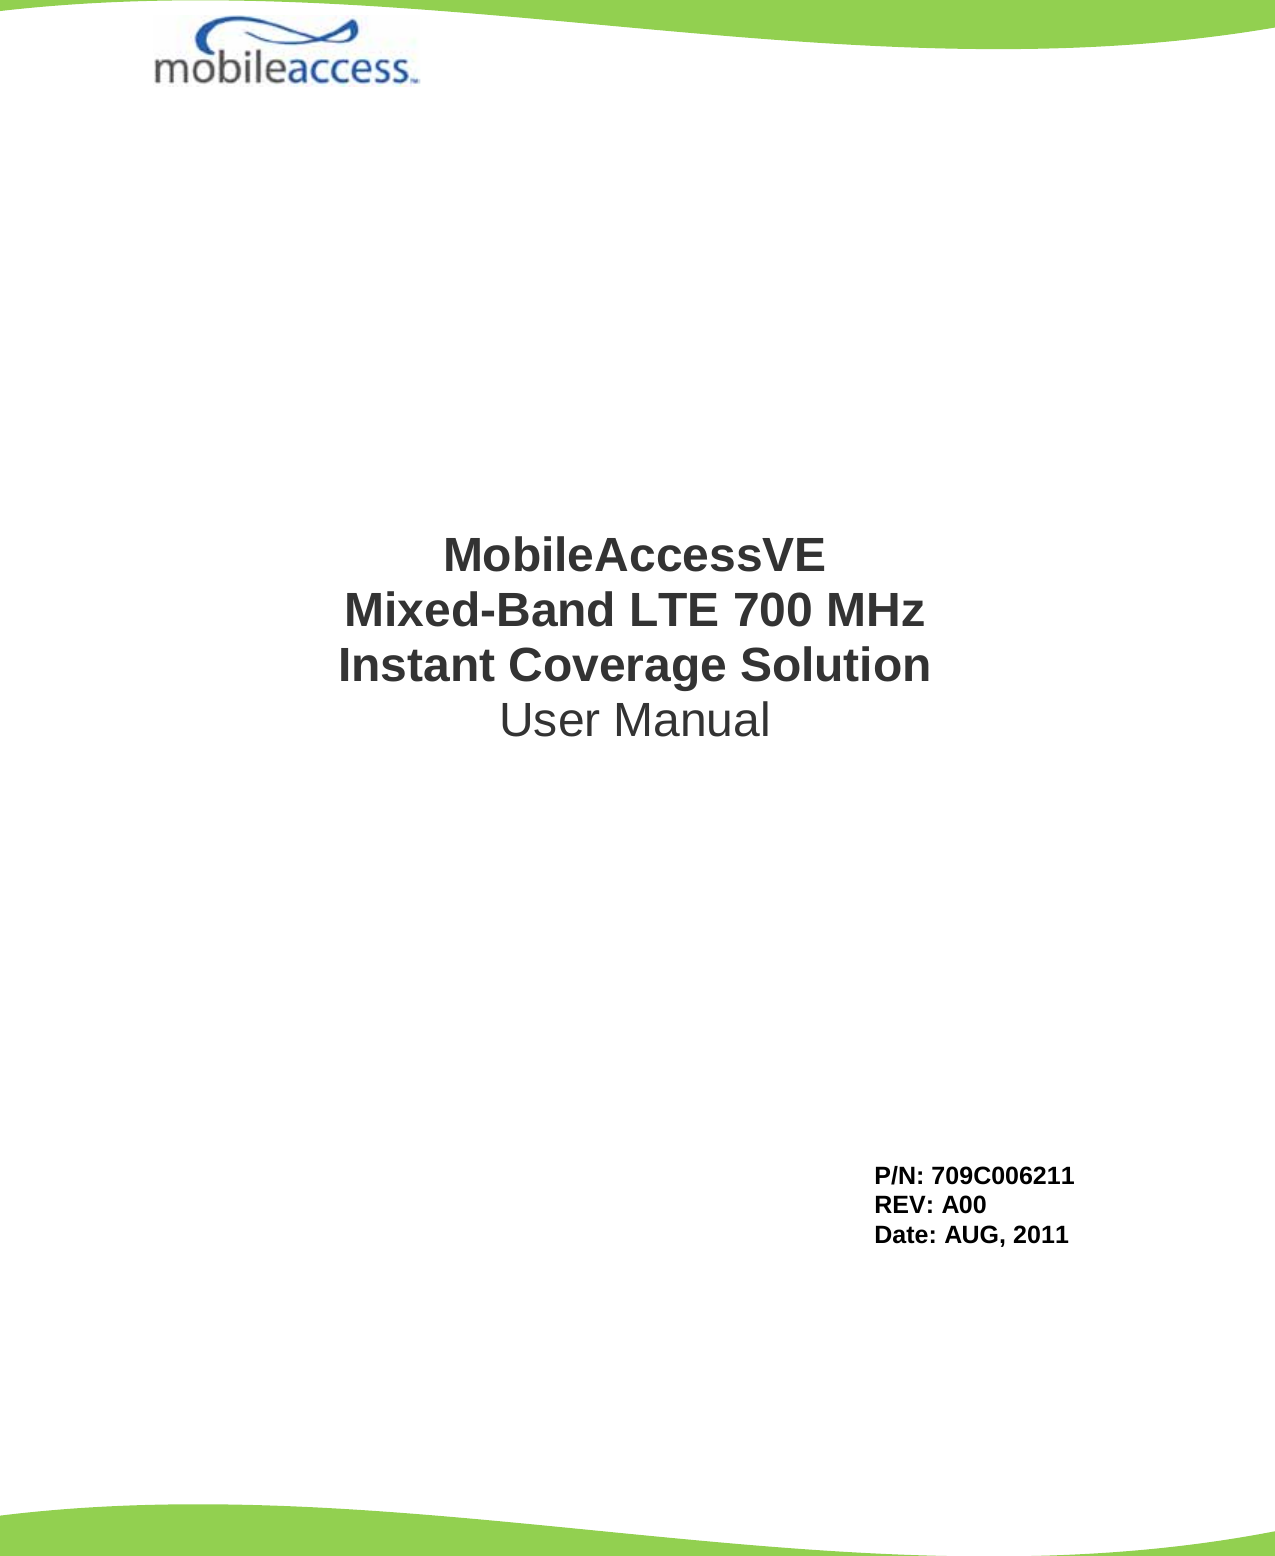                           MobileAccessVE  Mixed-Band LTE 700 MHz  Instant Coverage Solution User Manual P/N: 709C006211 REV: A00 Date: AUG, 2011 